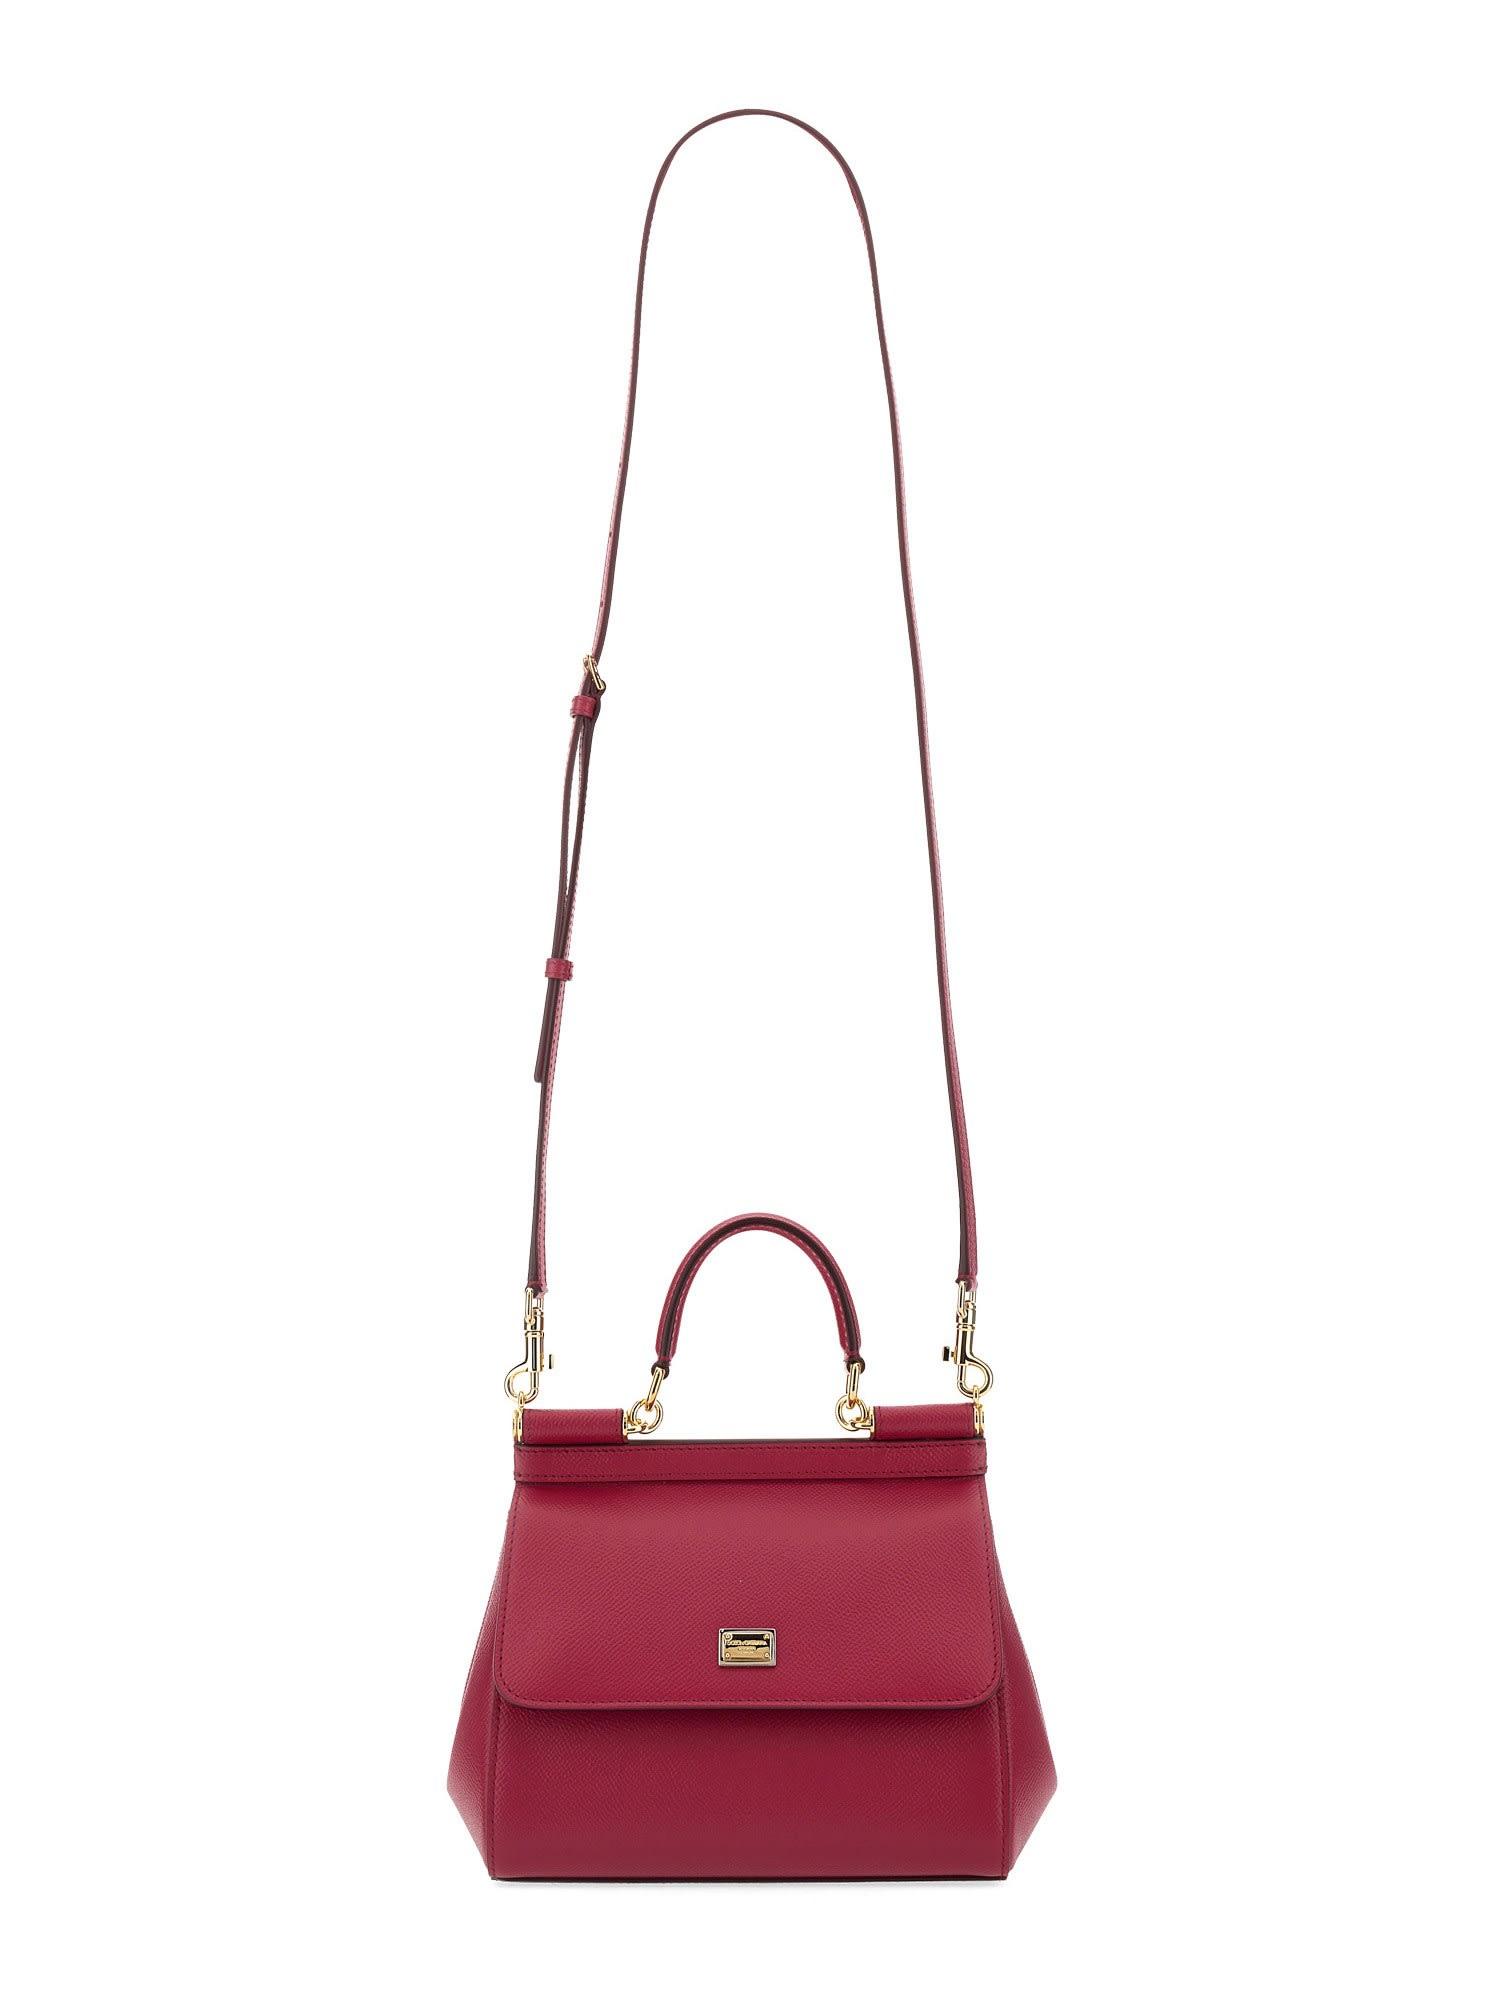 Dolce & Gabbana Sicily Small Bag in Red